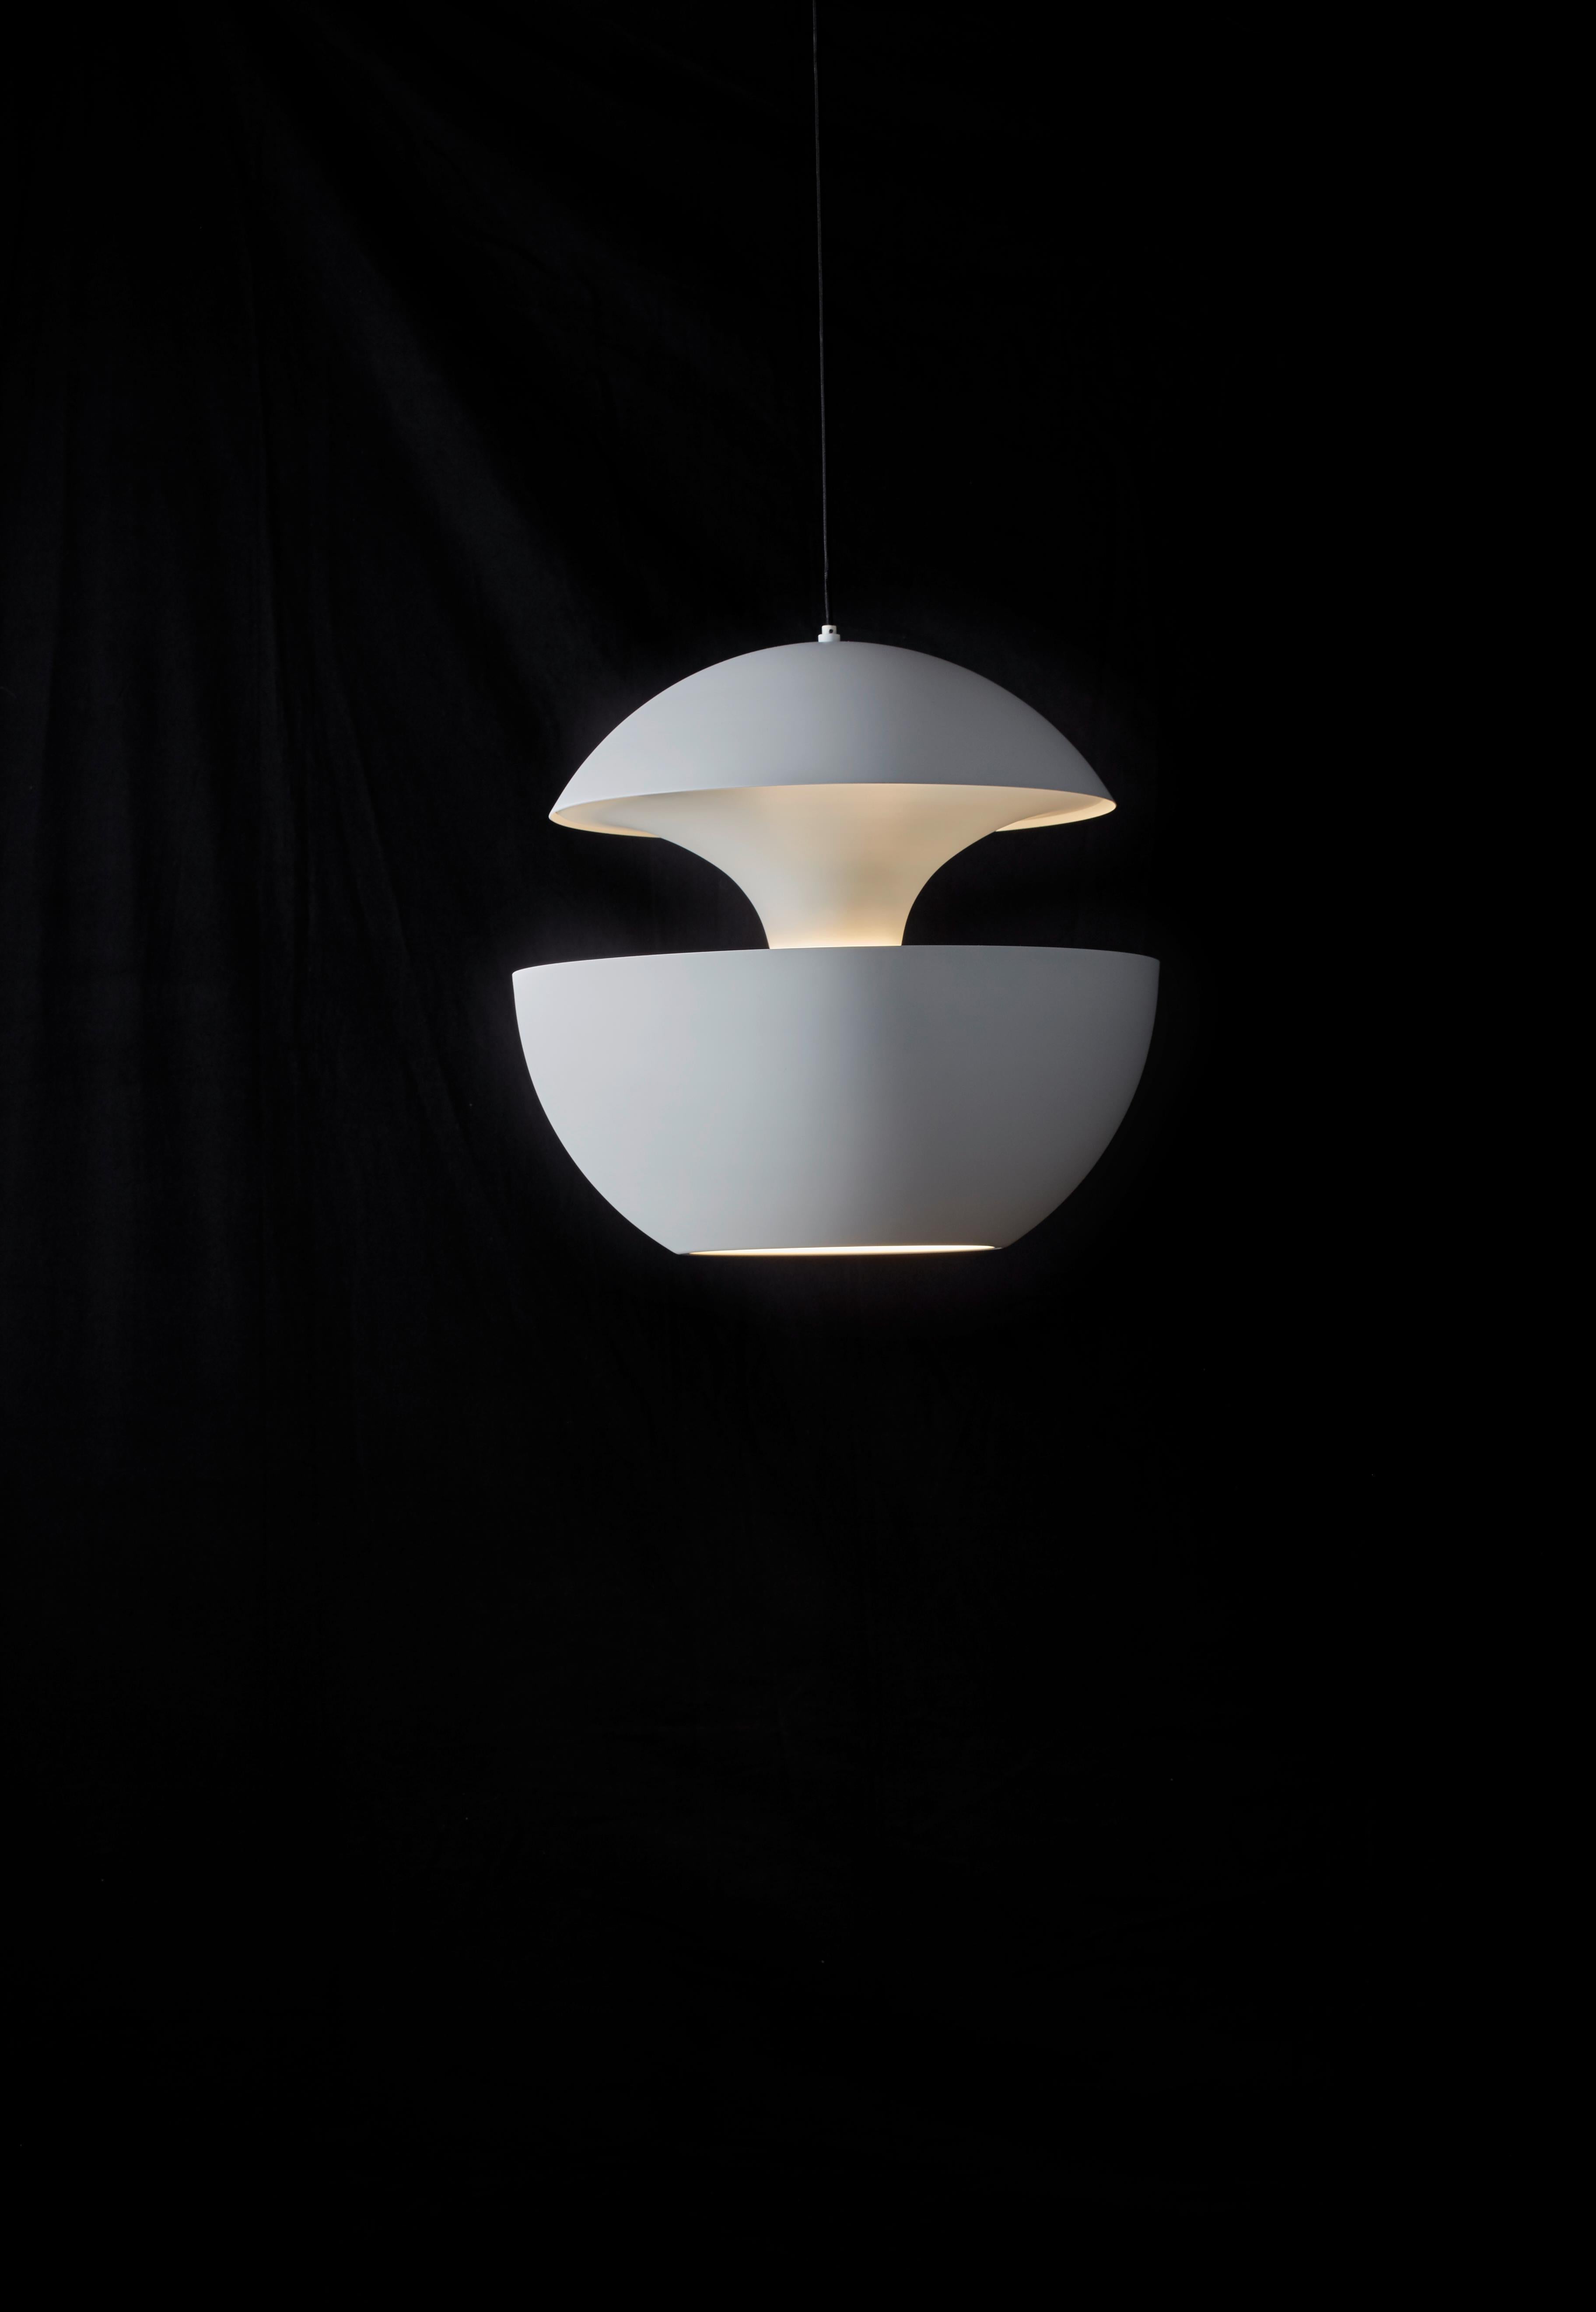 Here Comes The Sun Small white pendant lamp by Bertrand Balas
Dimensions: D 17.5 x H 17.5 cm
Materials: Aluminum
Available in different sizes and colors.

All our lamps can be wired according to each country. If sold to the USA it will be wired